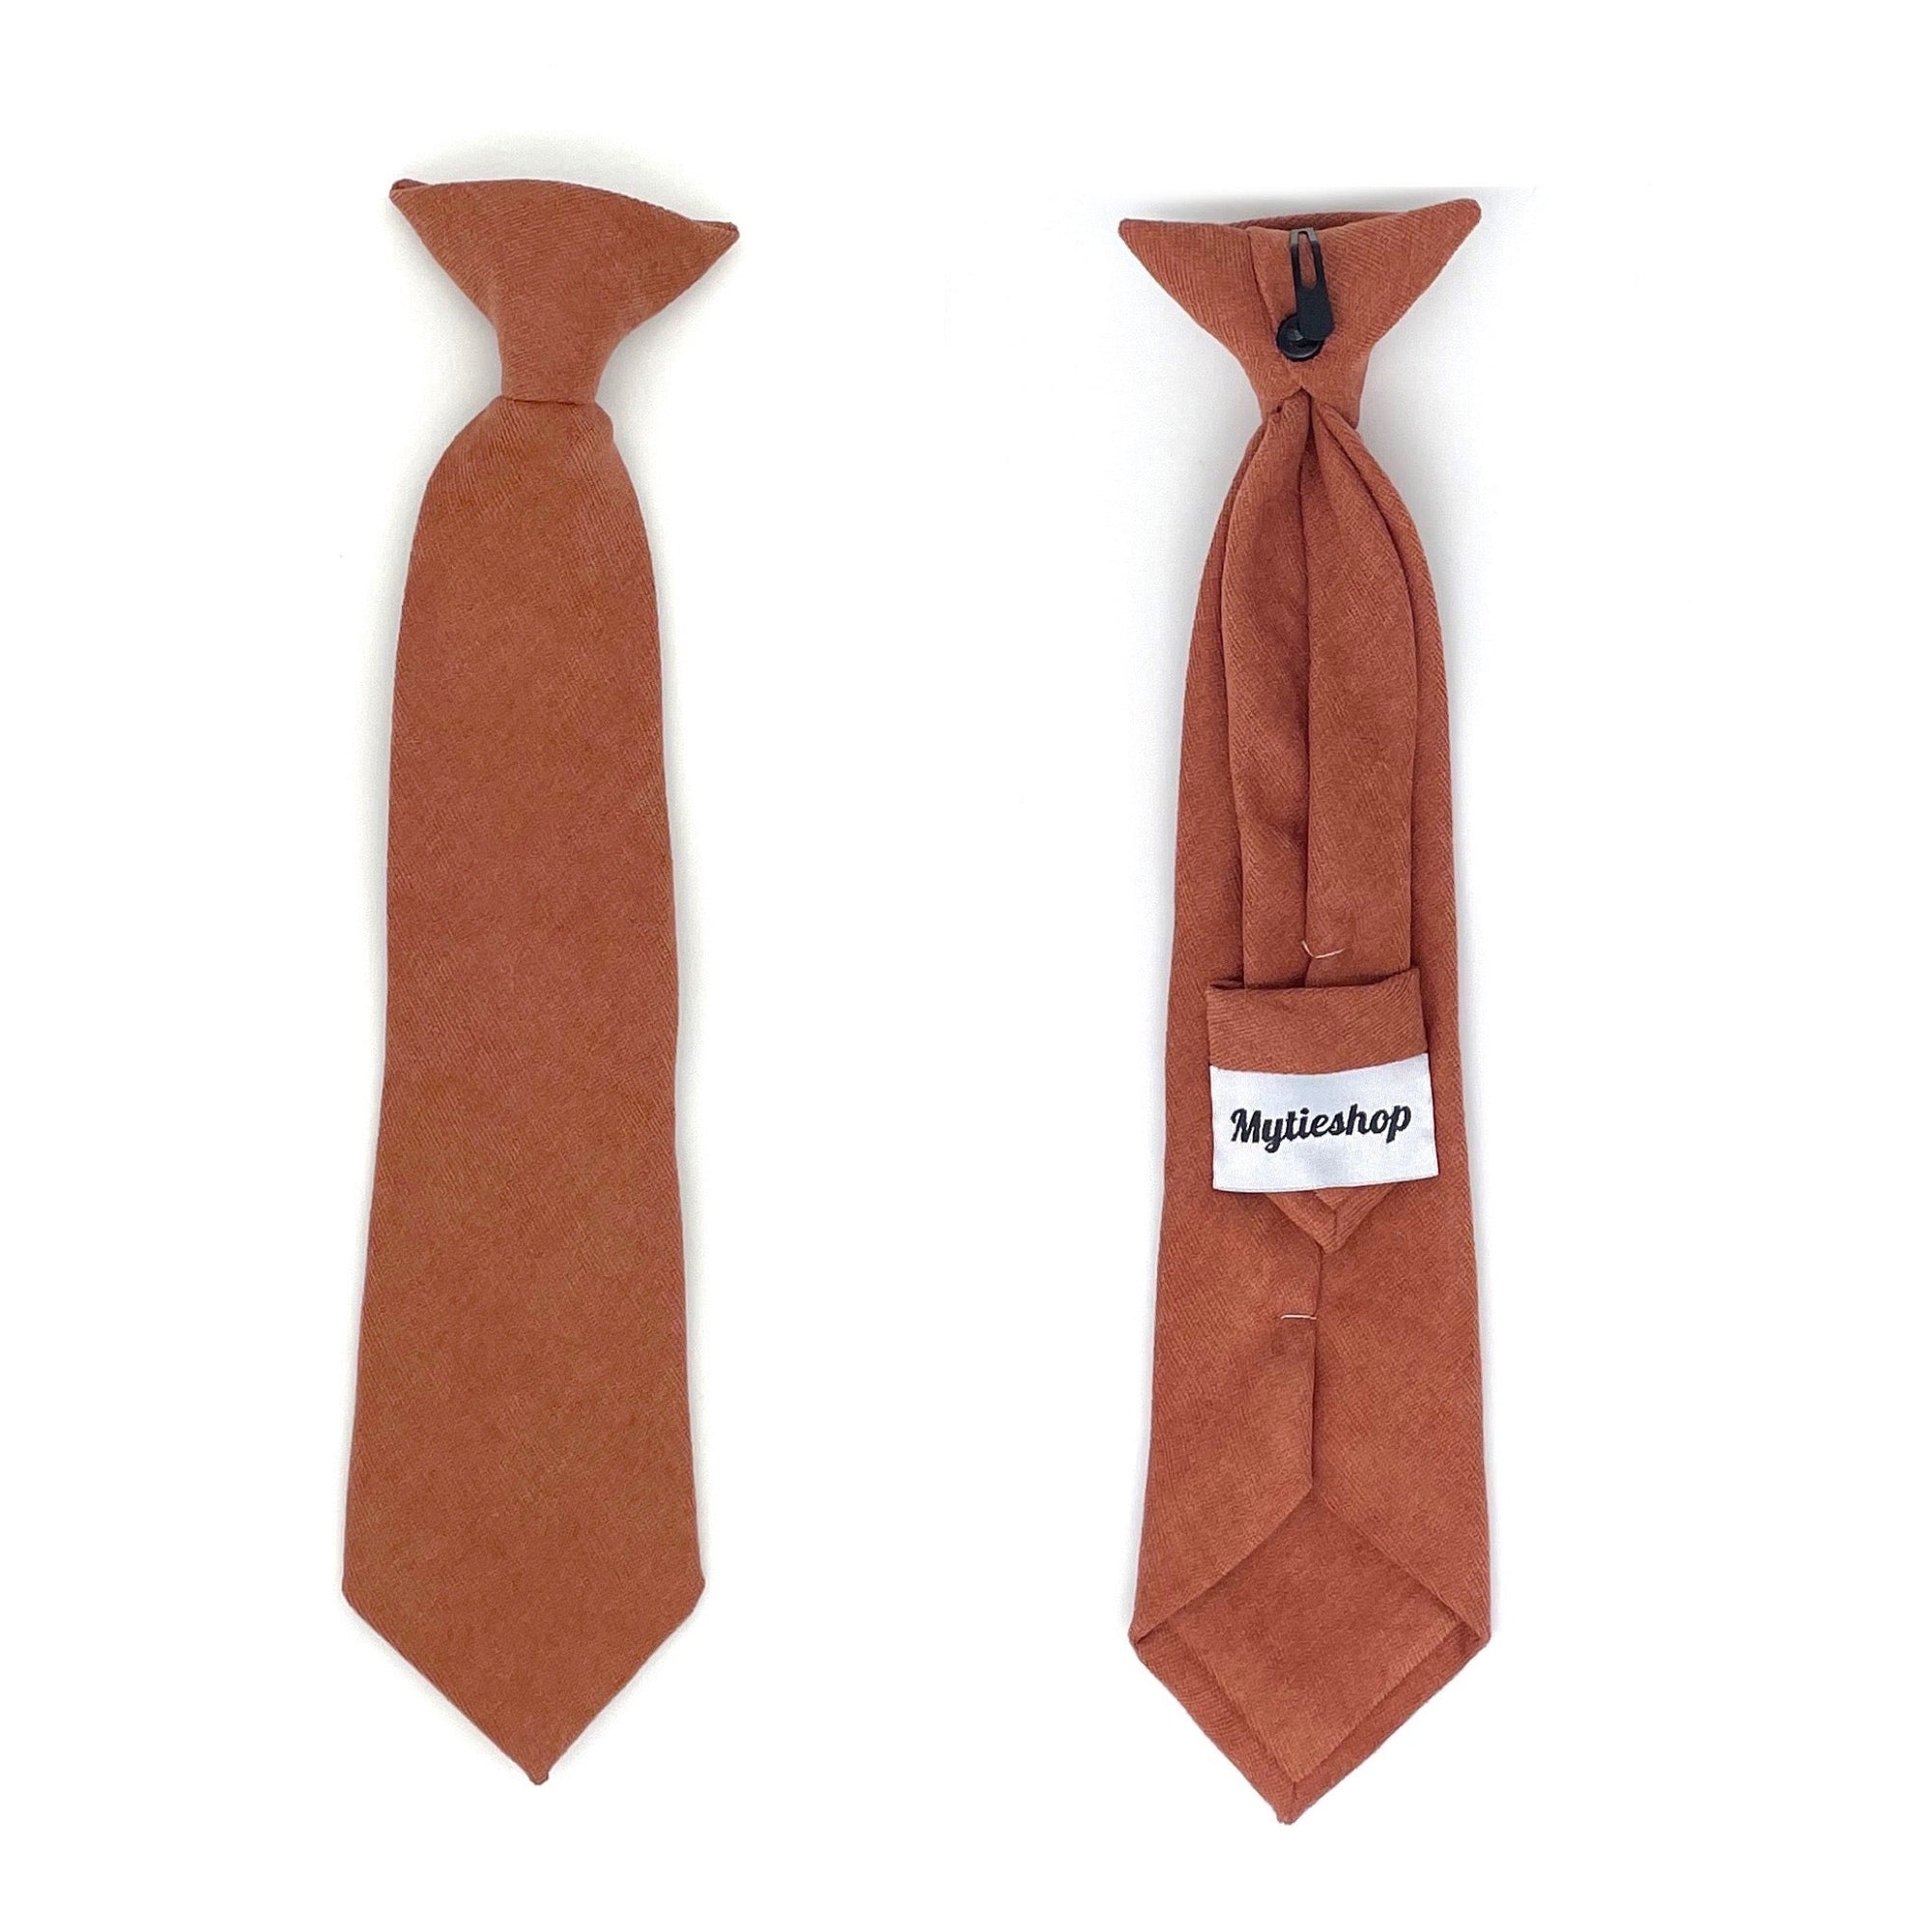 Clip on tie for kids Terracotta AUTUMN-Clip on tie for kids And Children; Junior Groomsmen Material: Suede Approx Size: Color: Terracotta Max width: 6.5 cm / 2.4 inches 9-24 months 26 CM2-5 years 31 CM9-11 Years 43 CM Add a pop of color to your little one&#39;s outfit with this Autumn Boys Floral Clip On Tie. This tie is perfect for any formal occasion, whether it&#39;s a wedding or family gathering. The clip-on design makes it easy to put on and take off, and the 2.36&quot; size is perfect for toddlers and 